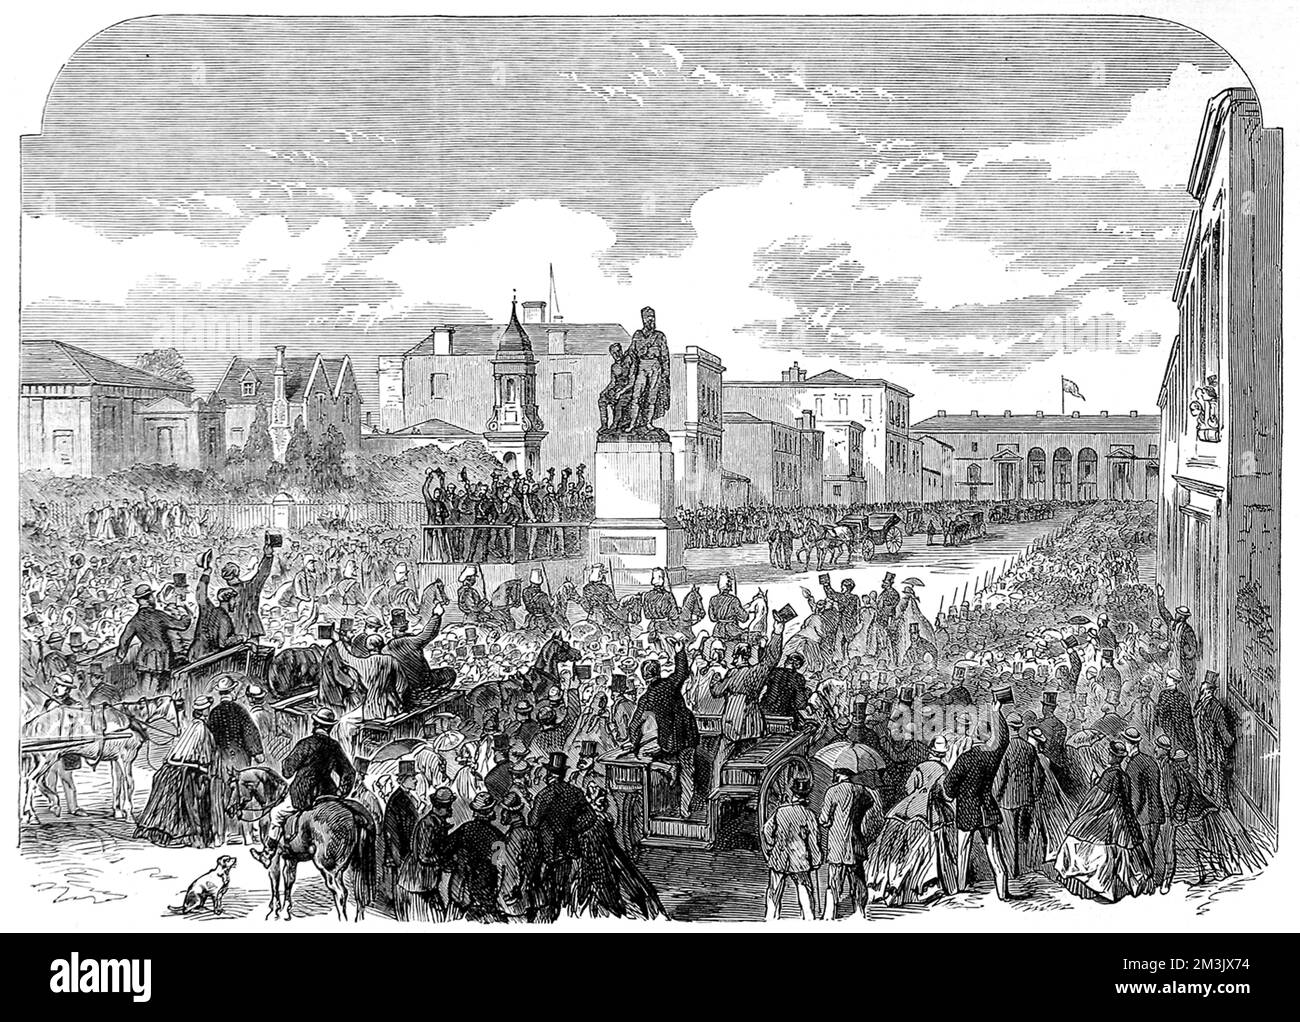 Inauguration of the Burke and Wills Monument in Melbourne, 21st April 1865.   Robert O'Hara Burke (1820-1861) and William Wills (1834-1861) were the leaders of the first successful expedition by white men to cross the continent of Australia, on foot, from south to north.   Although Burke, Wills and John King reached the north shore of Australia, only King survived the return journey to Melbourne; the others dying of starvation.  1865 Stock Photo